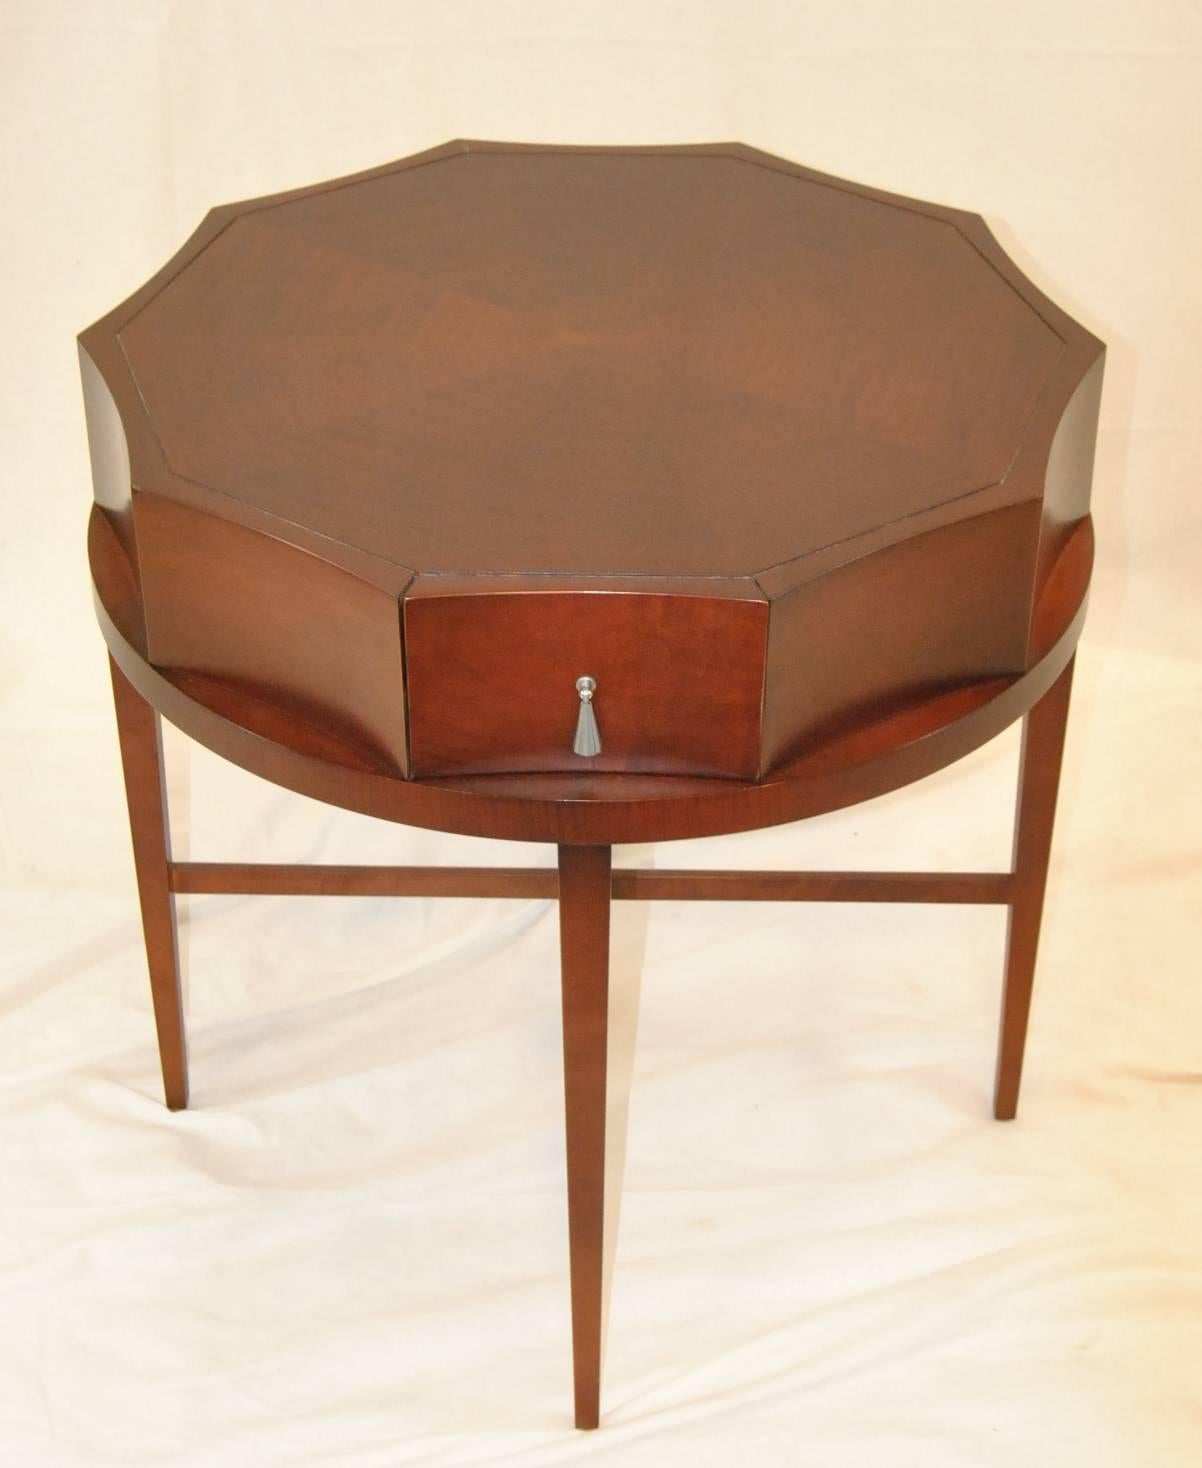 A great 26" in diameter mahogany side table by Baker Furniture. This is a table that can add style to any decor. The top features a scalloped edge and one dovetailed drawer with a pewter pull. The top sits on four tapered legs with cross